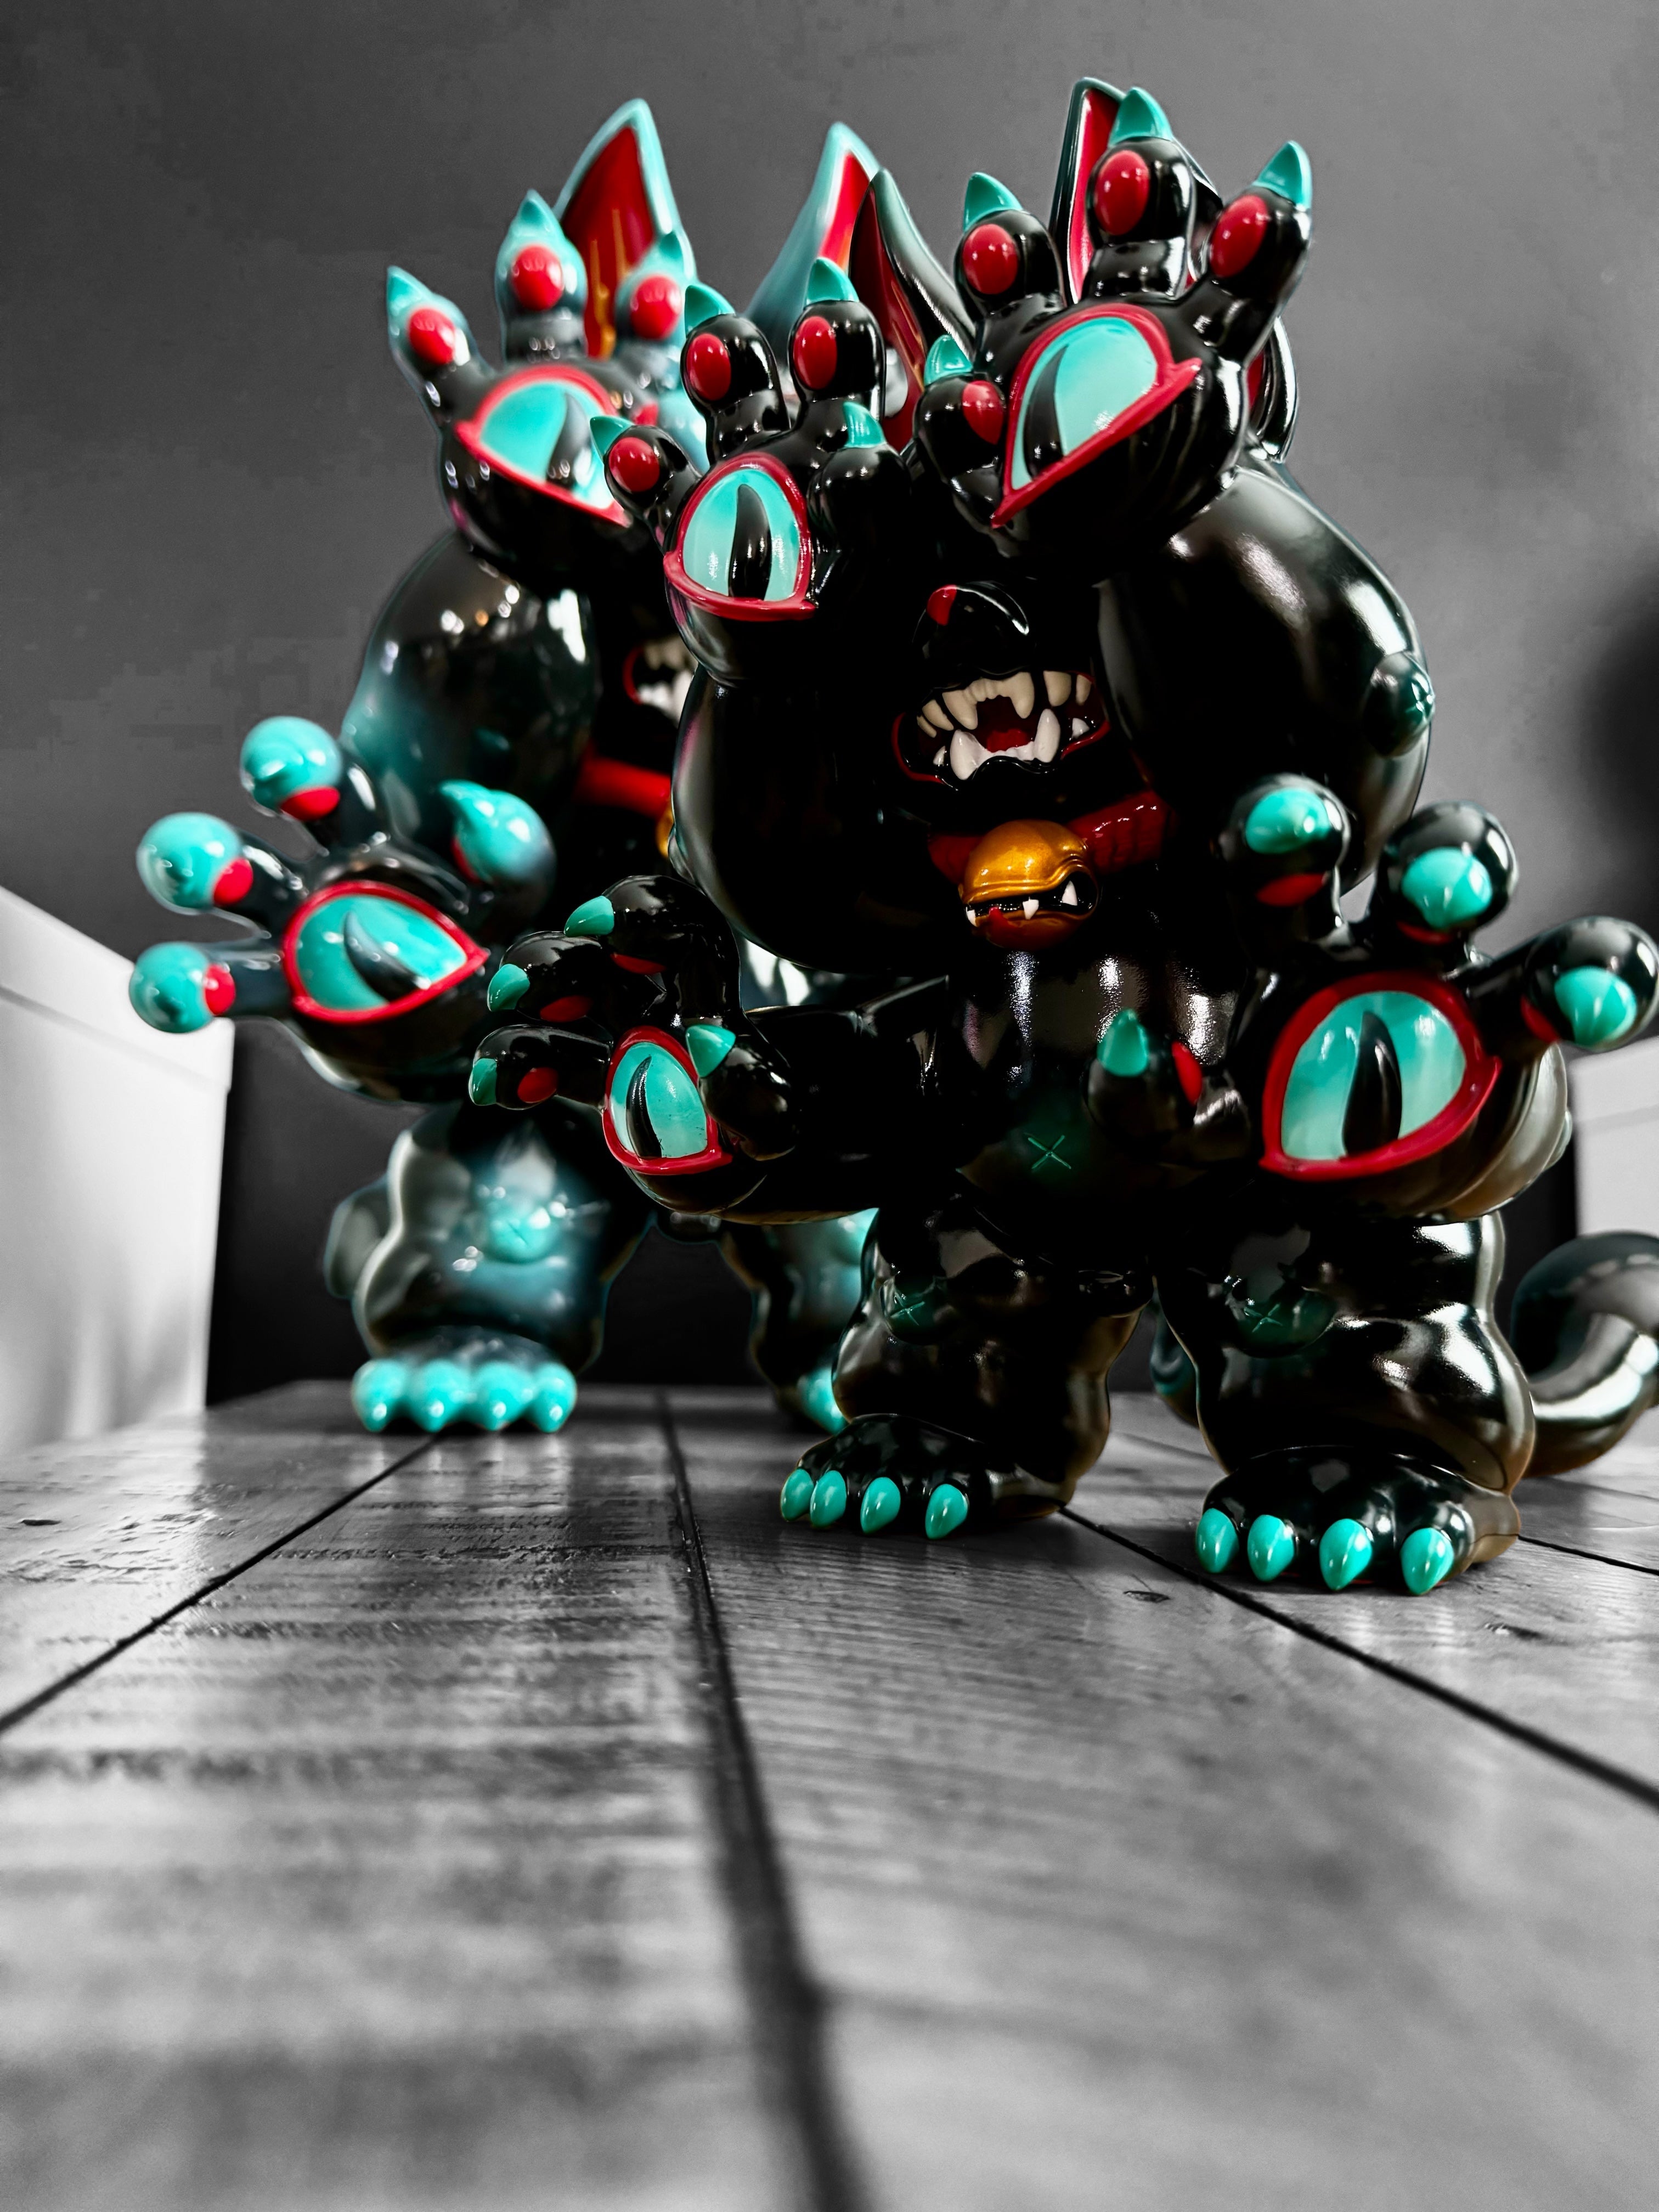 A blind box and art toy store presents DAINIGIRUJIN Black Ver. by Grape Brain. Vinyl toy, 8 tall, 9.5 long, limited to 100pcs. Close-up of black and red toy animal.